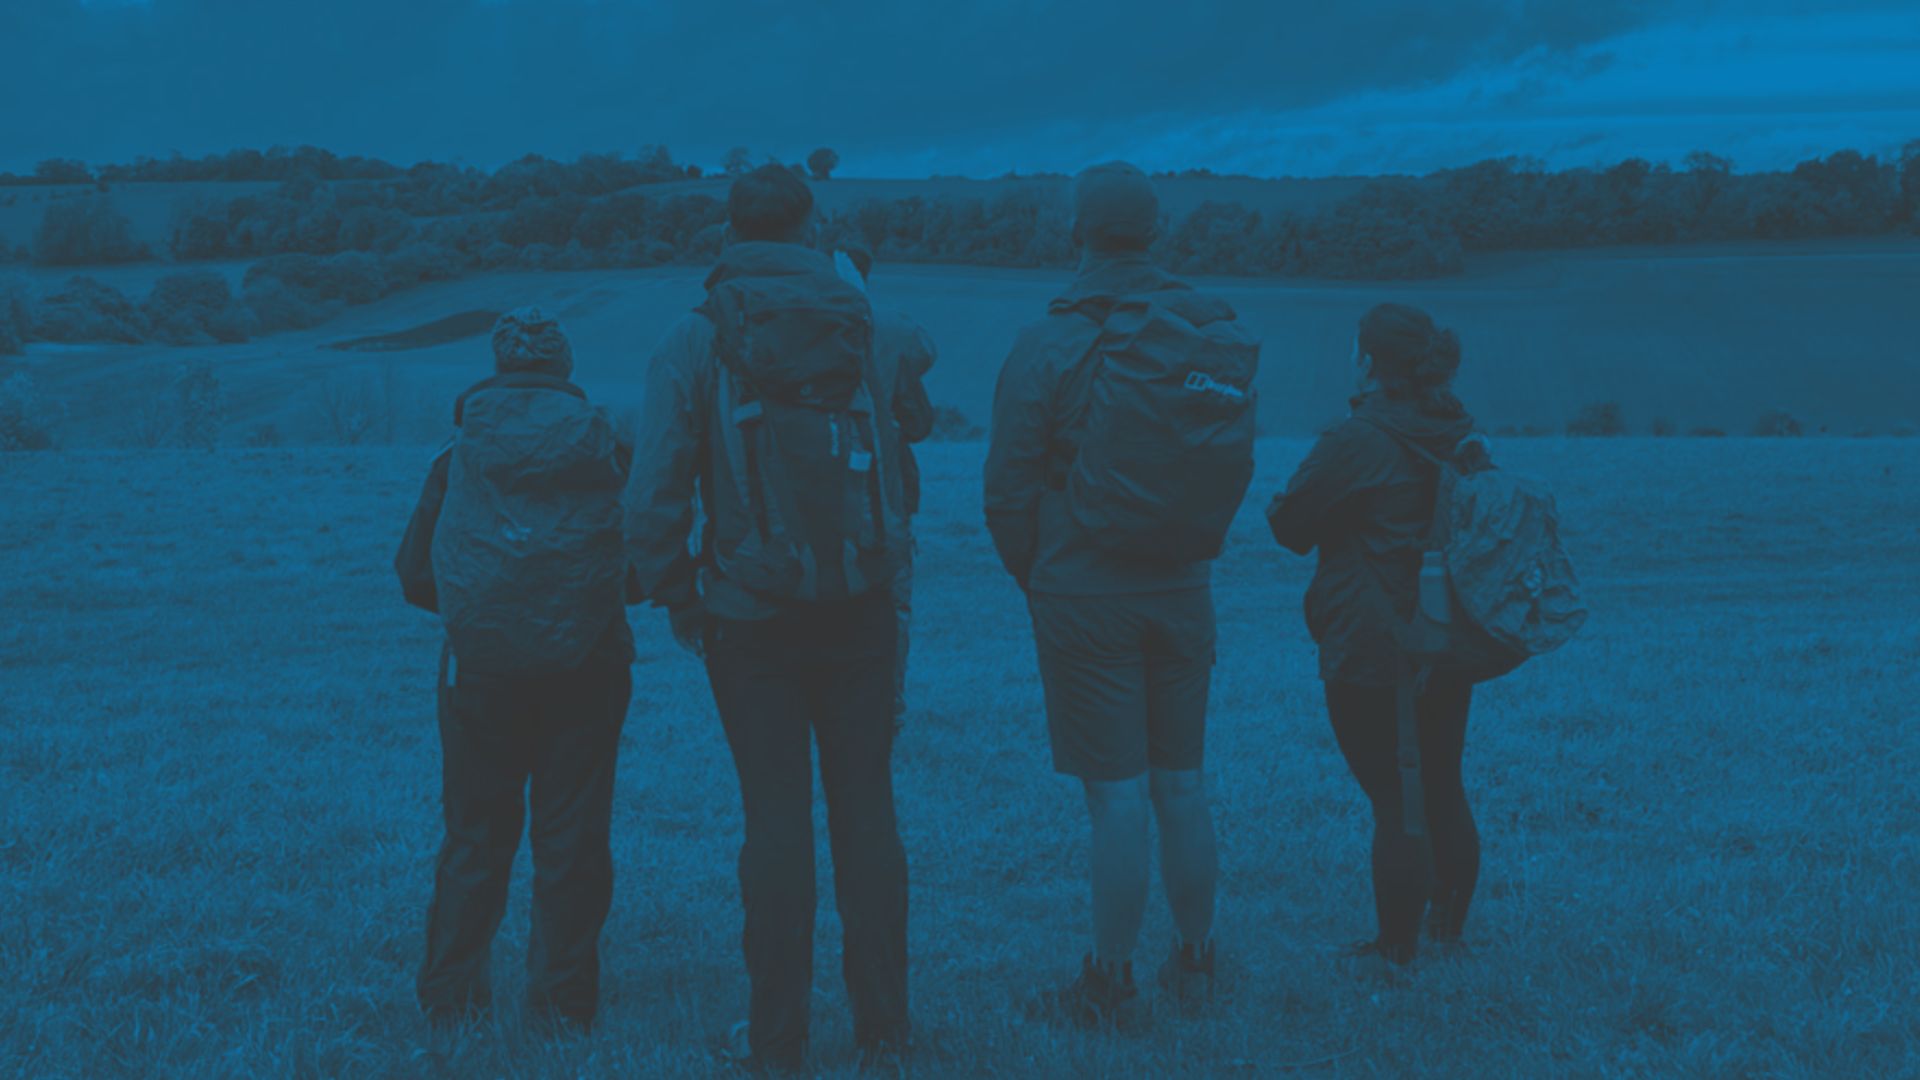 A group of people walking in the countryside looking at the view - Funding for projects that tackle issues of inclusion in nature and wild places